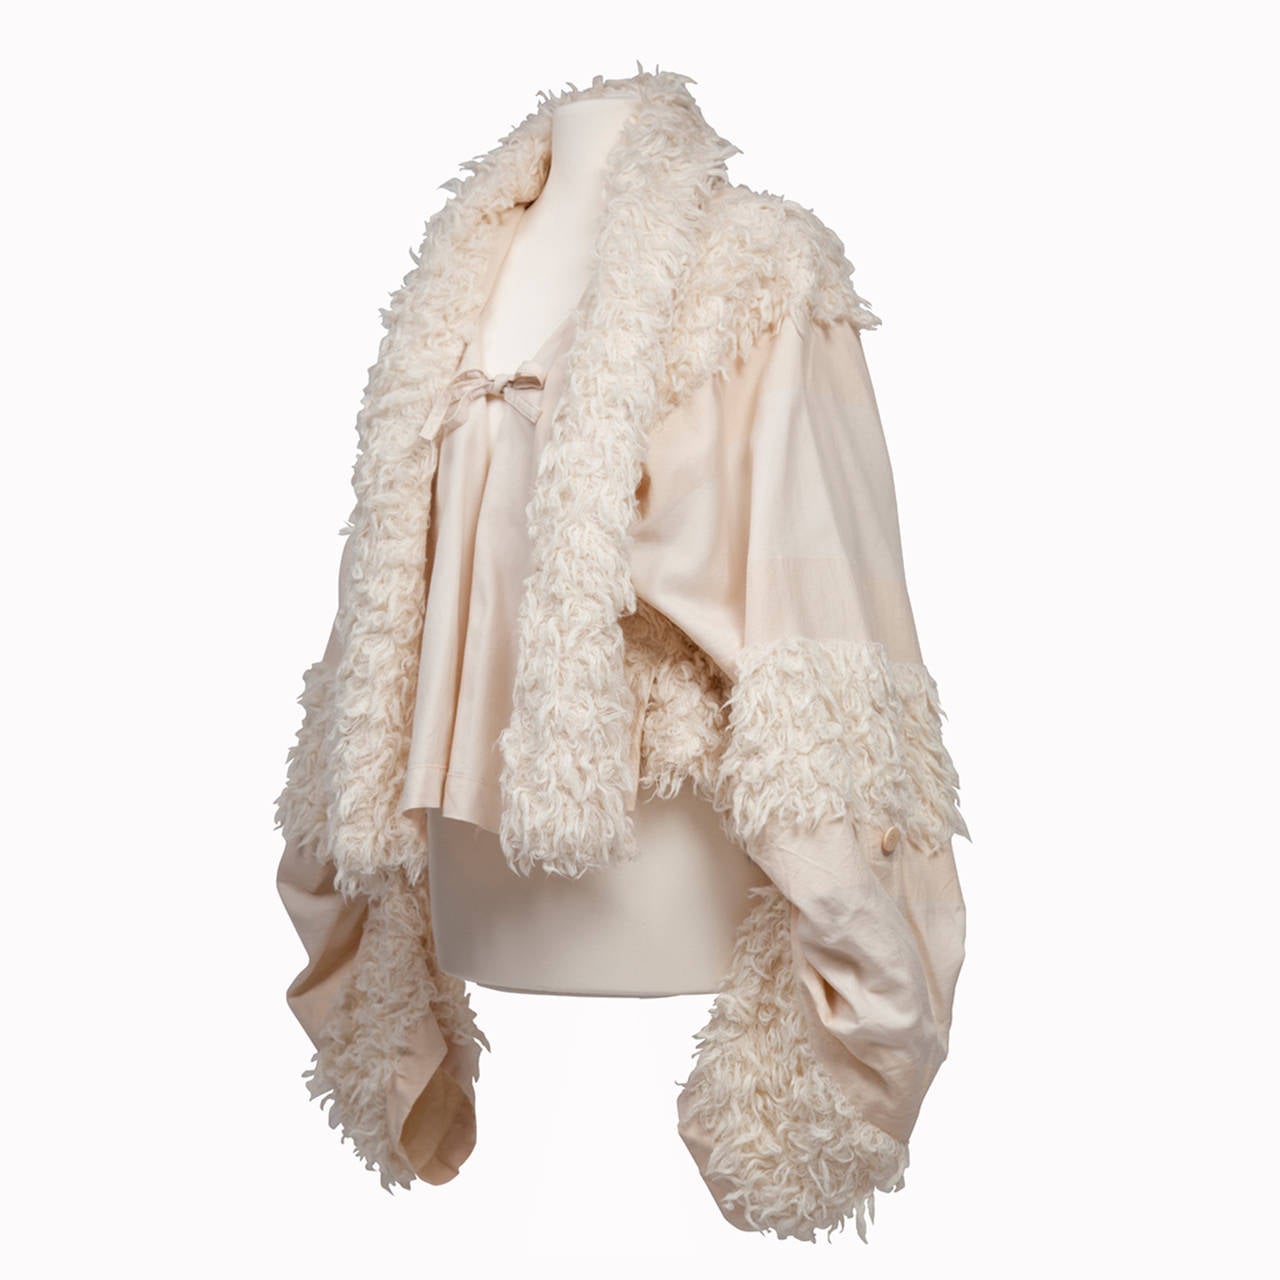 Incredible Issey Miyake A-line cotton jacket in natural white with mohair details.
The jacket closes with bow on chest. Sleeve length adjustable.
Inside jacket has piping finishing. 
Material : cotton, wool, cupro, silk, mohair 
52 cm length from